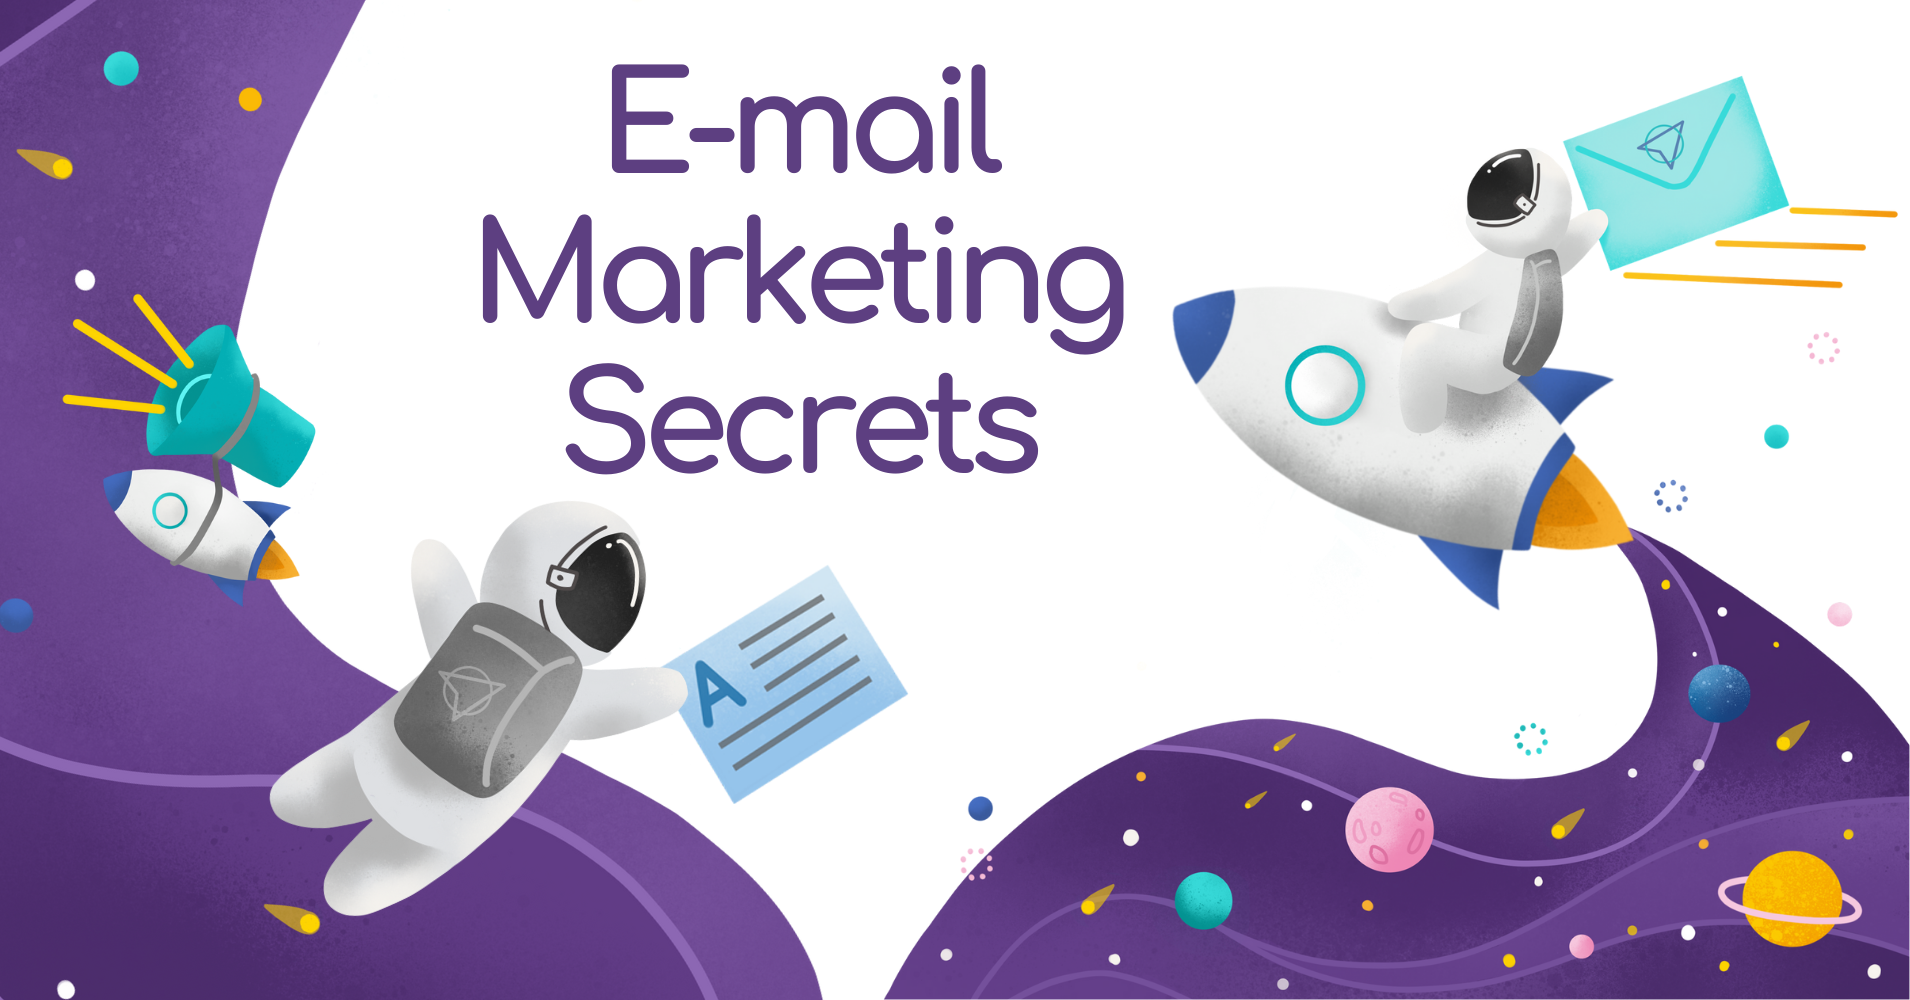 The e-mail marketing secrets. How to make a mailing campaign that will convince customers to buy.